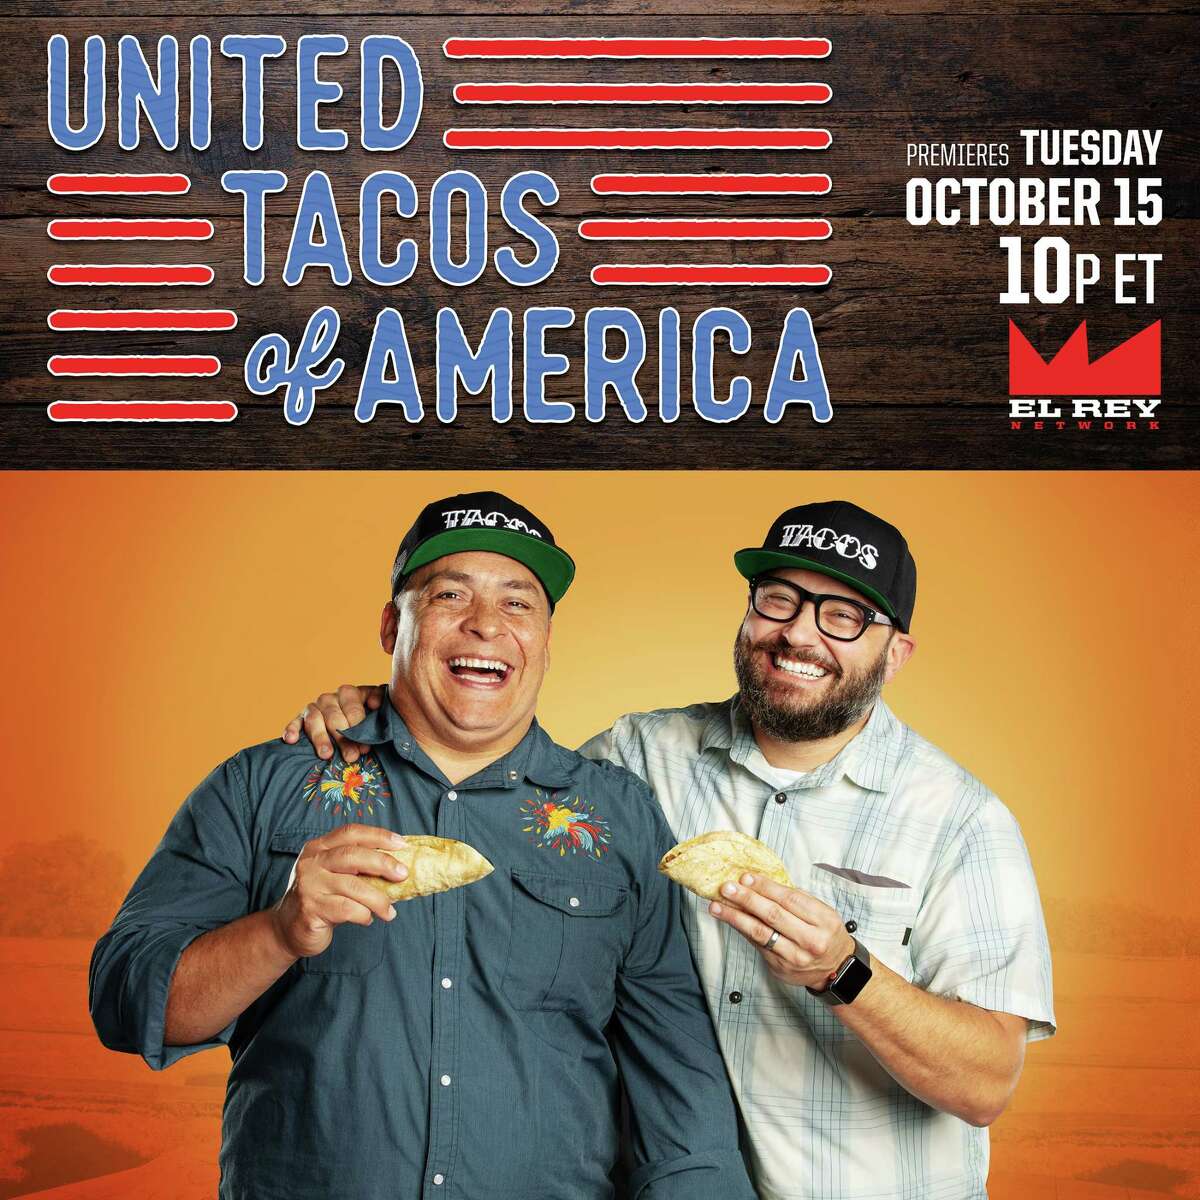 "United Tacos of America" is a new, eight-episode docu-travel series on El Rey Network exploring the culinary and cultural aspects of tacos in America hosted by taco journalists Mando Rayo and Jarod Neece.